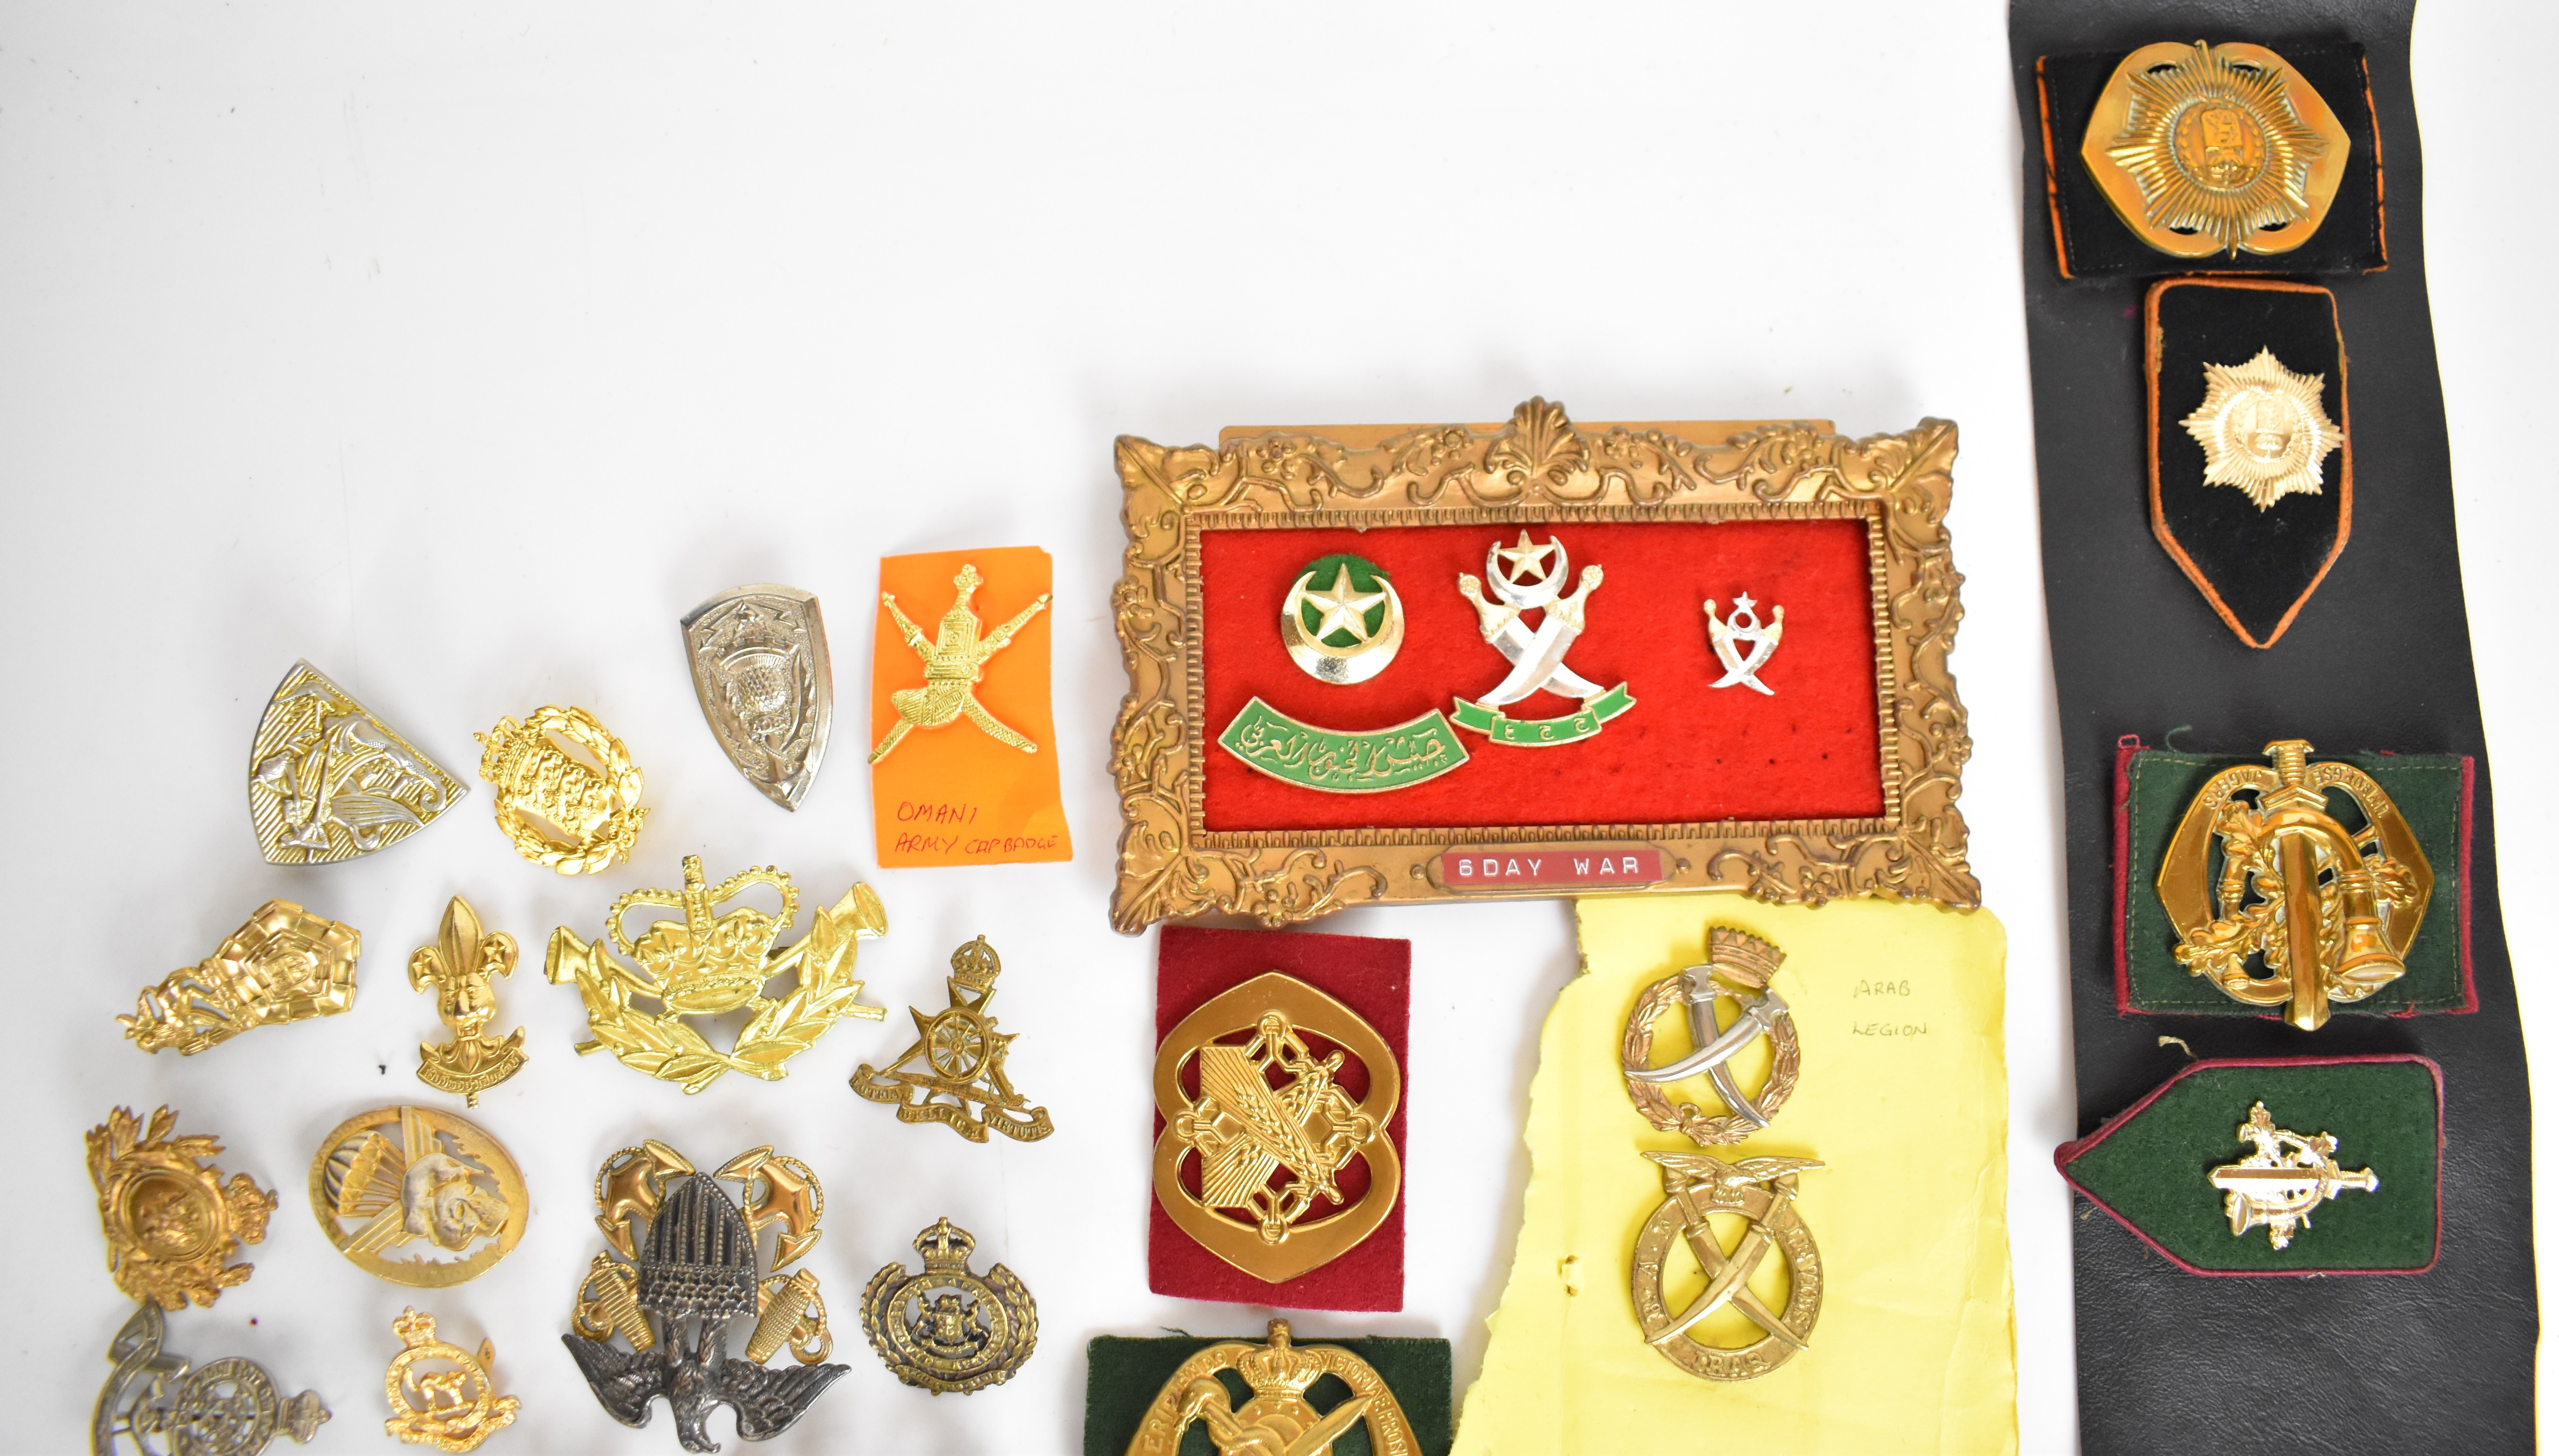 Large collection of approximately 100 overseas forces badges including American, French, King's - Image 4 of 4